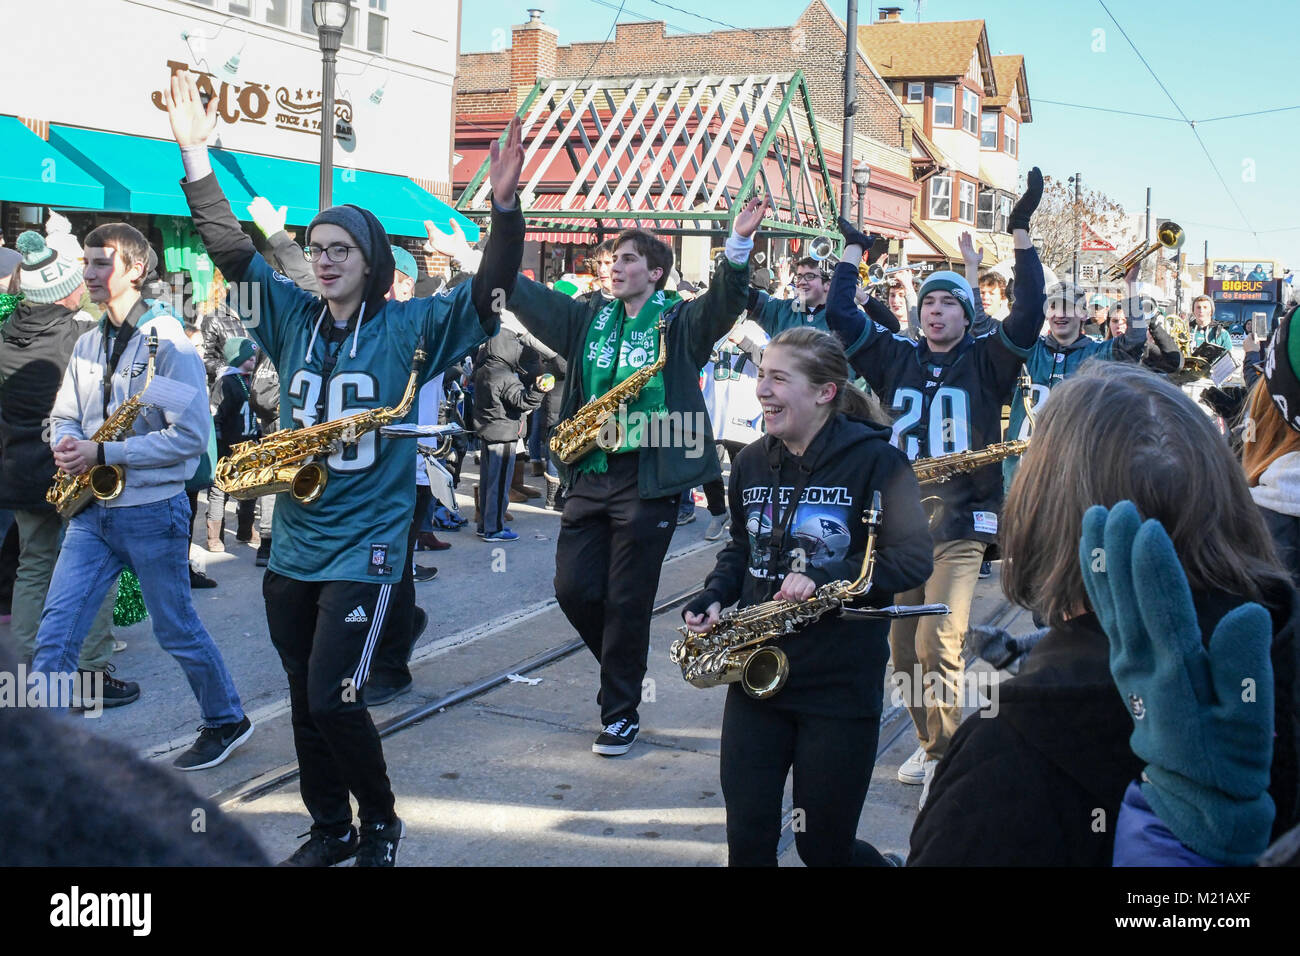 Media, PA, USA, The Penncrest High School marching band entertains thousands of Philadelphia Eagles fans as they line the streets of Media for a pep rally supporting the NFC Championship Philadelphia Eagles in their pursuit of winning the NFL Super Bowl. Media, Delaware County, PA is located approximately 14 miles South of Philadelphia, PA. Temperatures in the mid 20 degree range (fahrenheit) Credit: Don Mennig/Alamy Live News Stock Photo